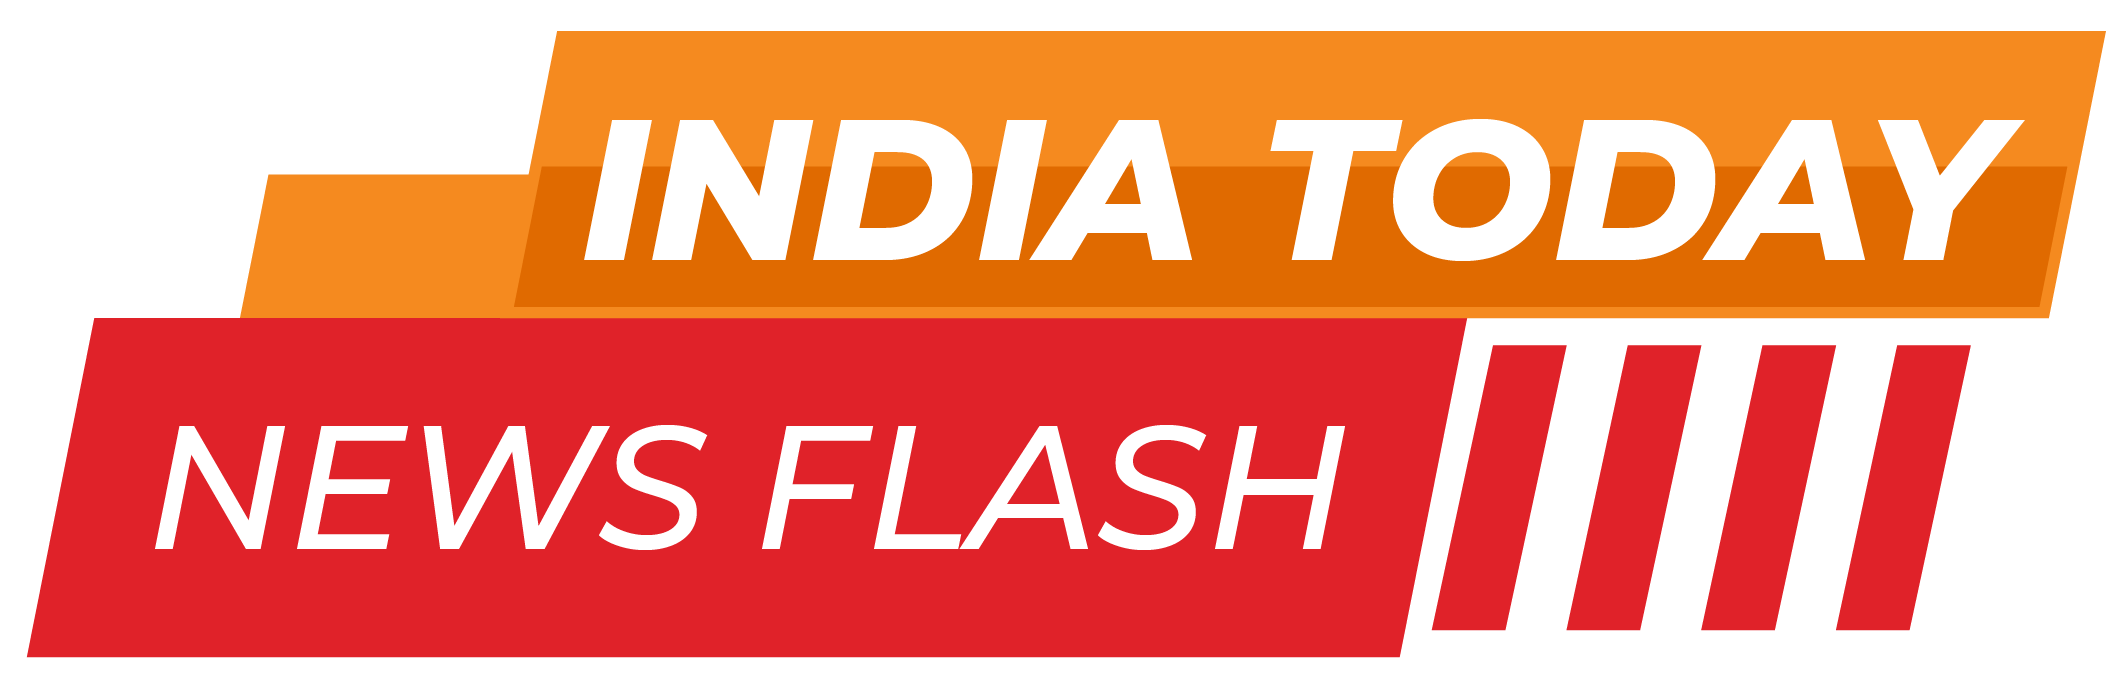 India Today News Flash